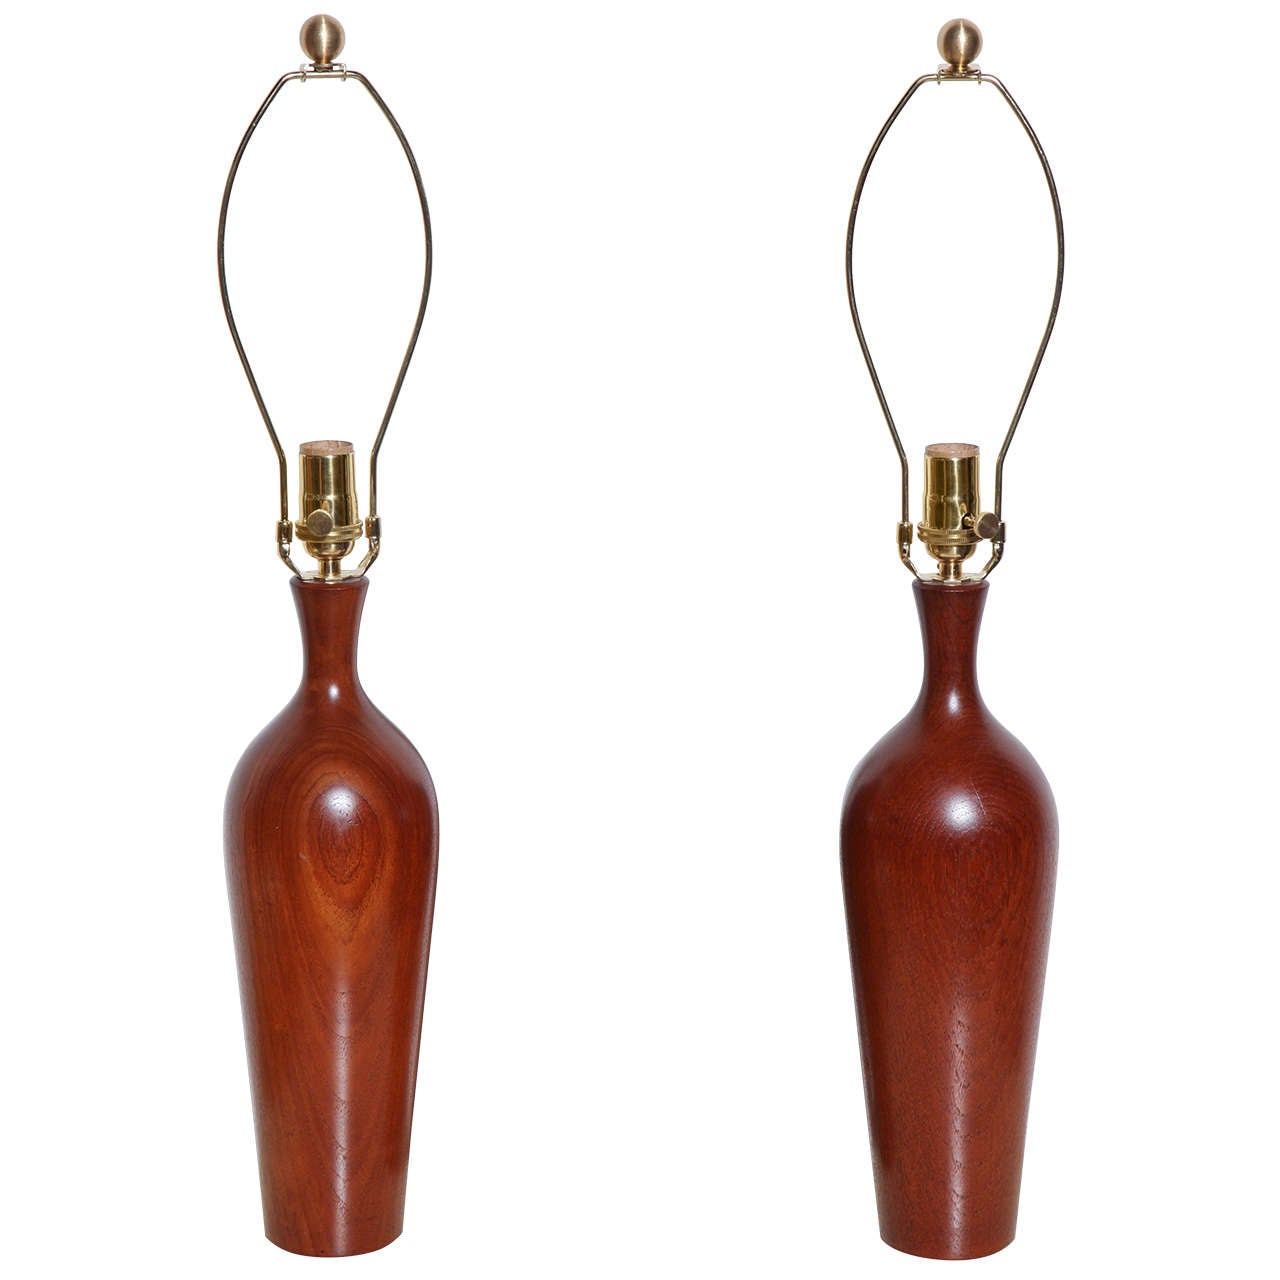 Tall Pair of ESA Denmark Turned Solid Teak Table Lamps, 1950s